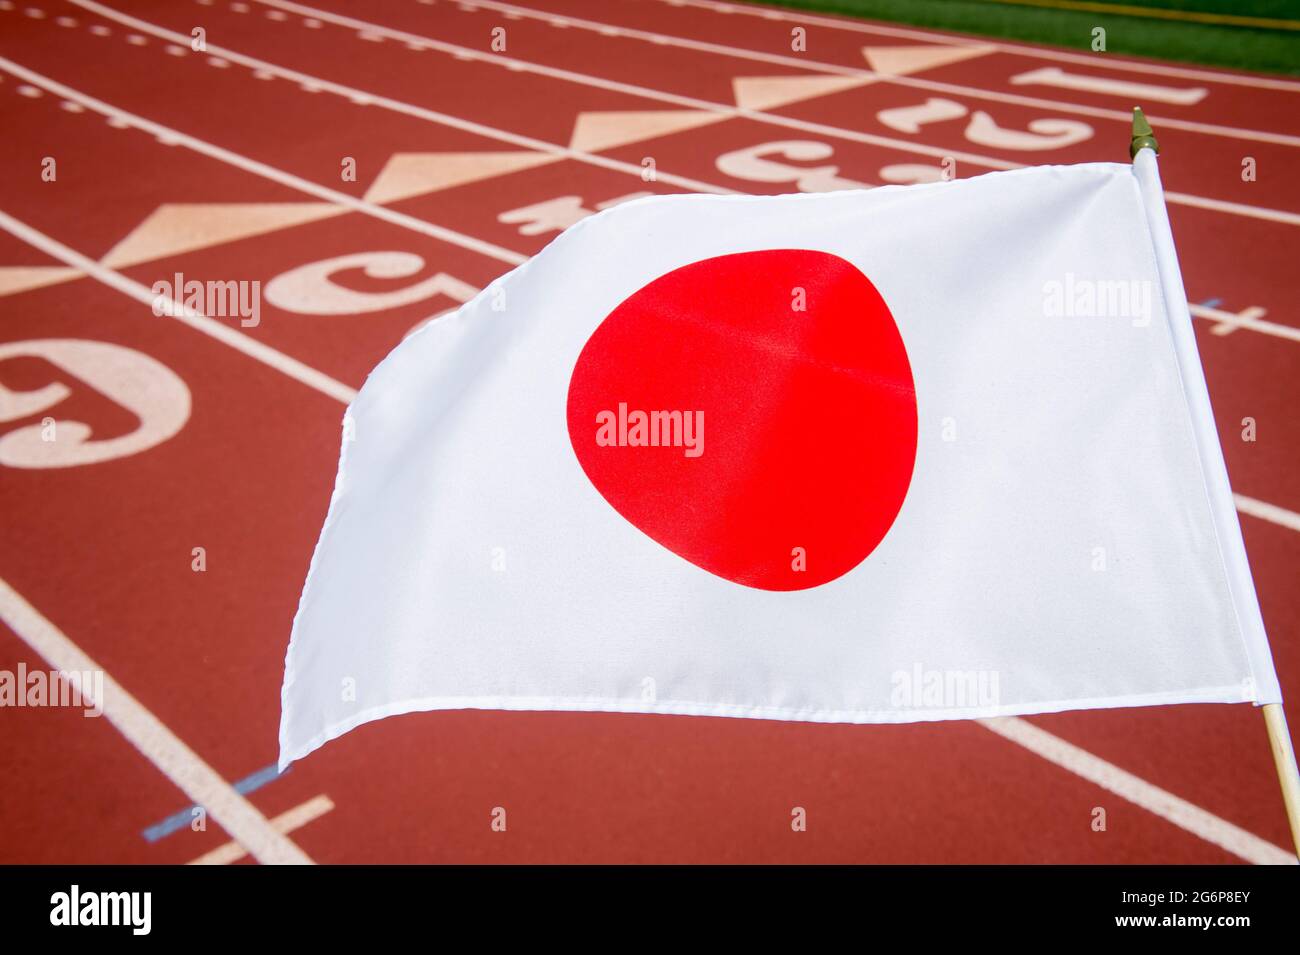 Bright sunny view of a Japanese flag flying in front of the numbered lanes at the starting line of a red running track Stock Photo